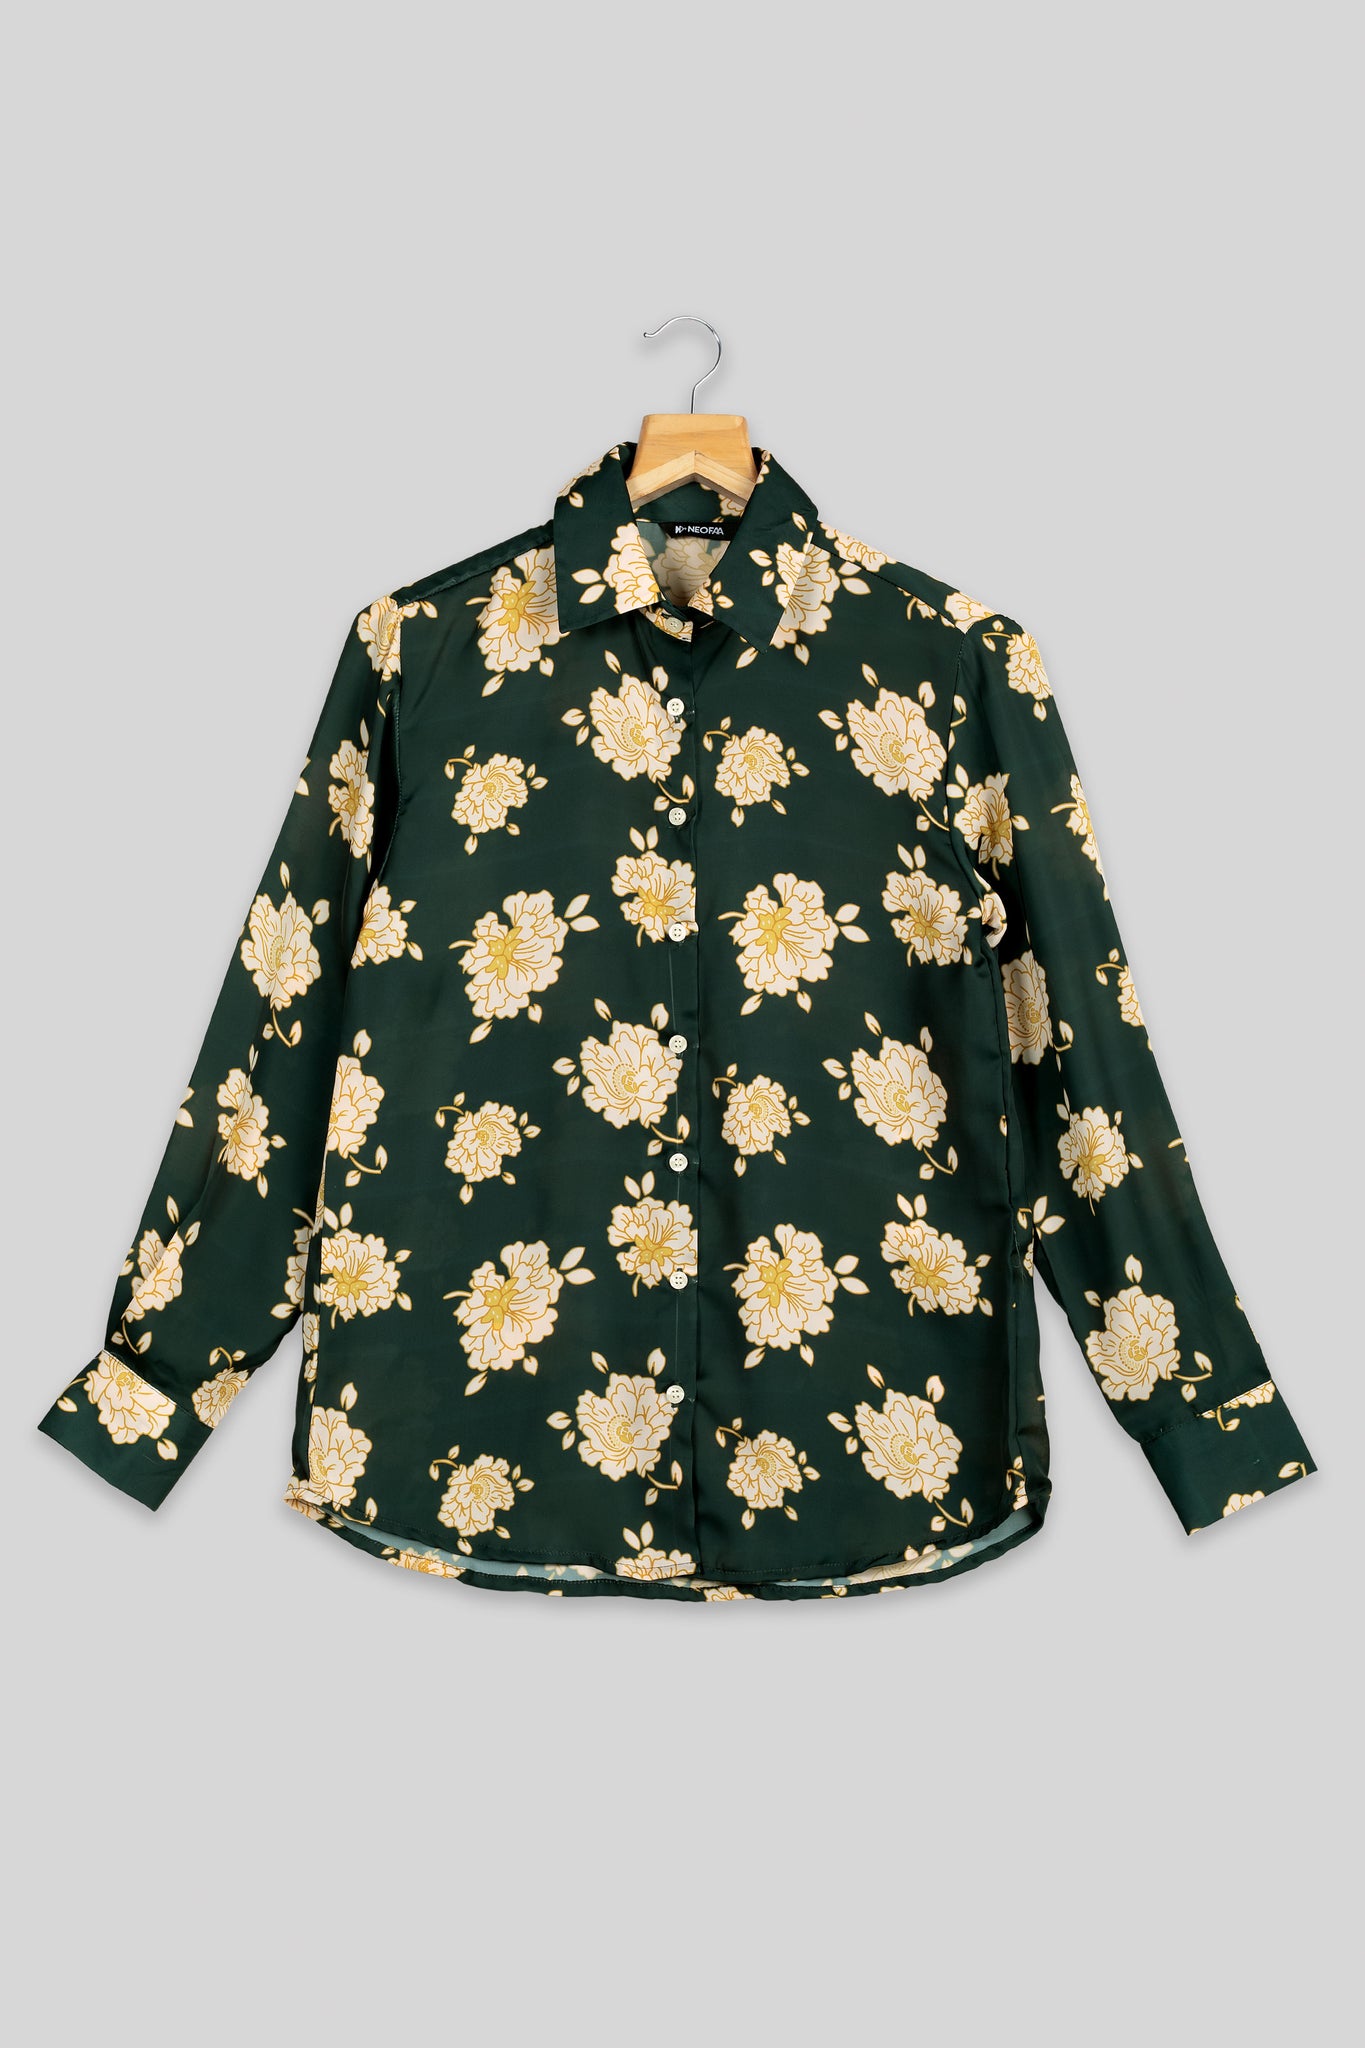 Attractive Floral Shirt For Women